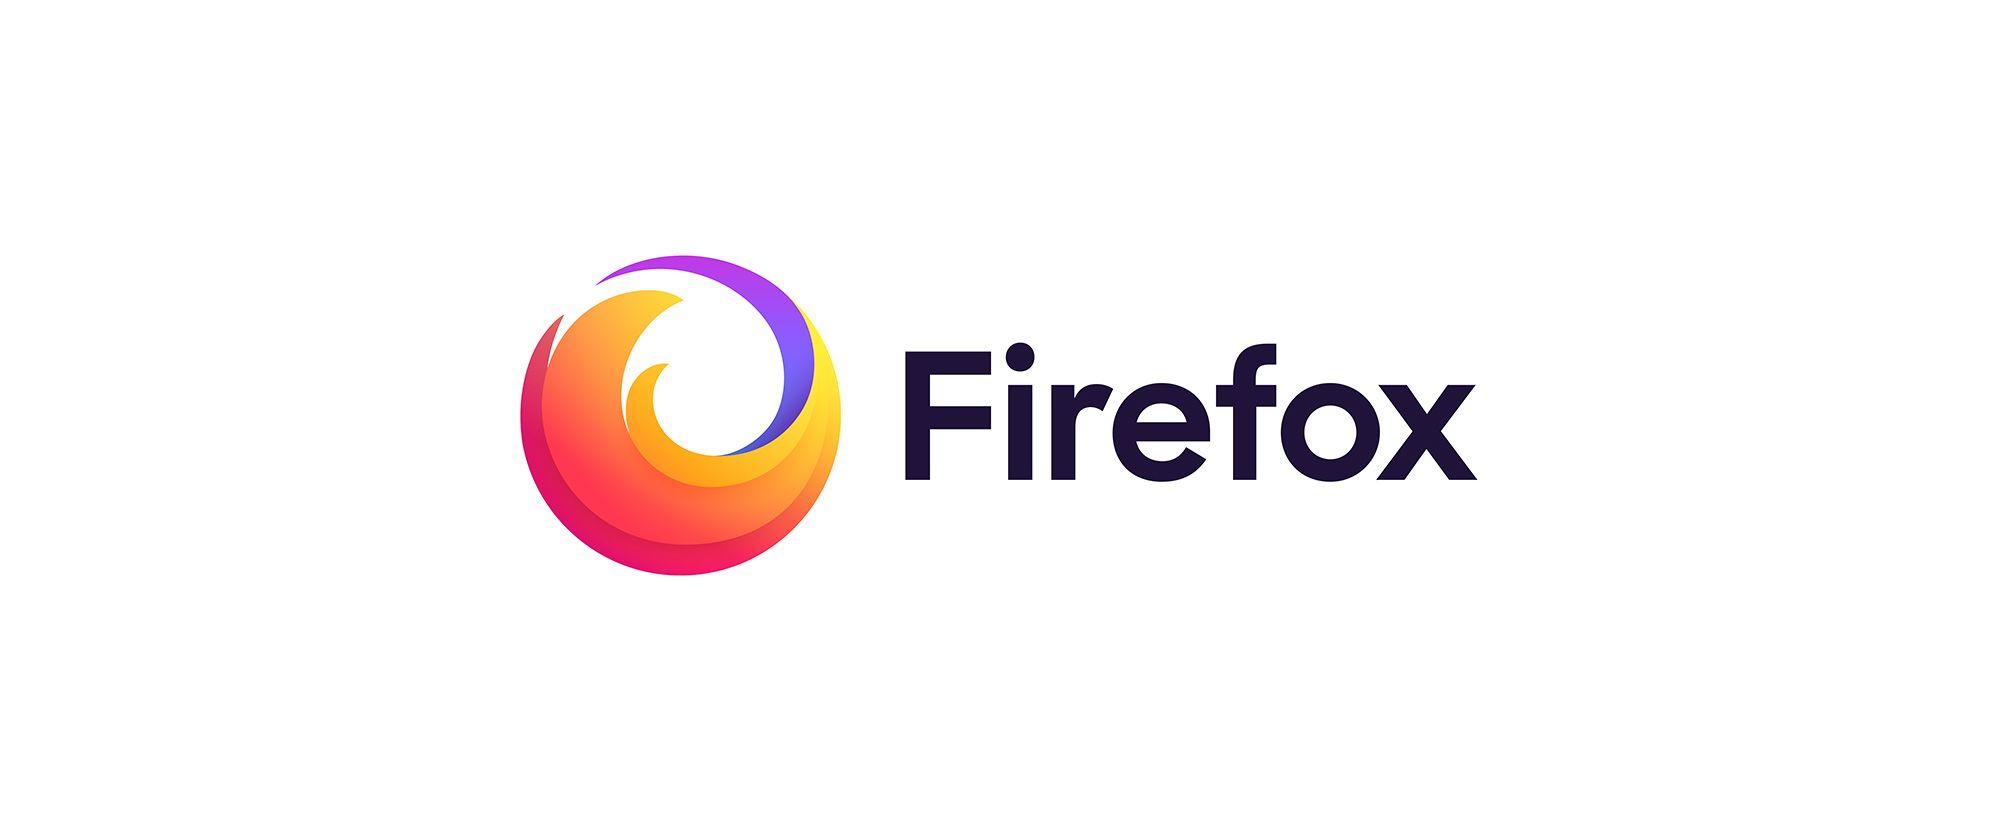 Say Logo - Brand New: New Logos for Firefox by Ramotion and In-house